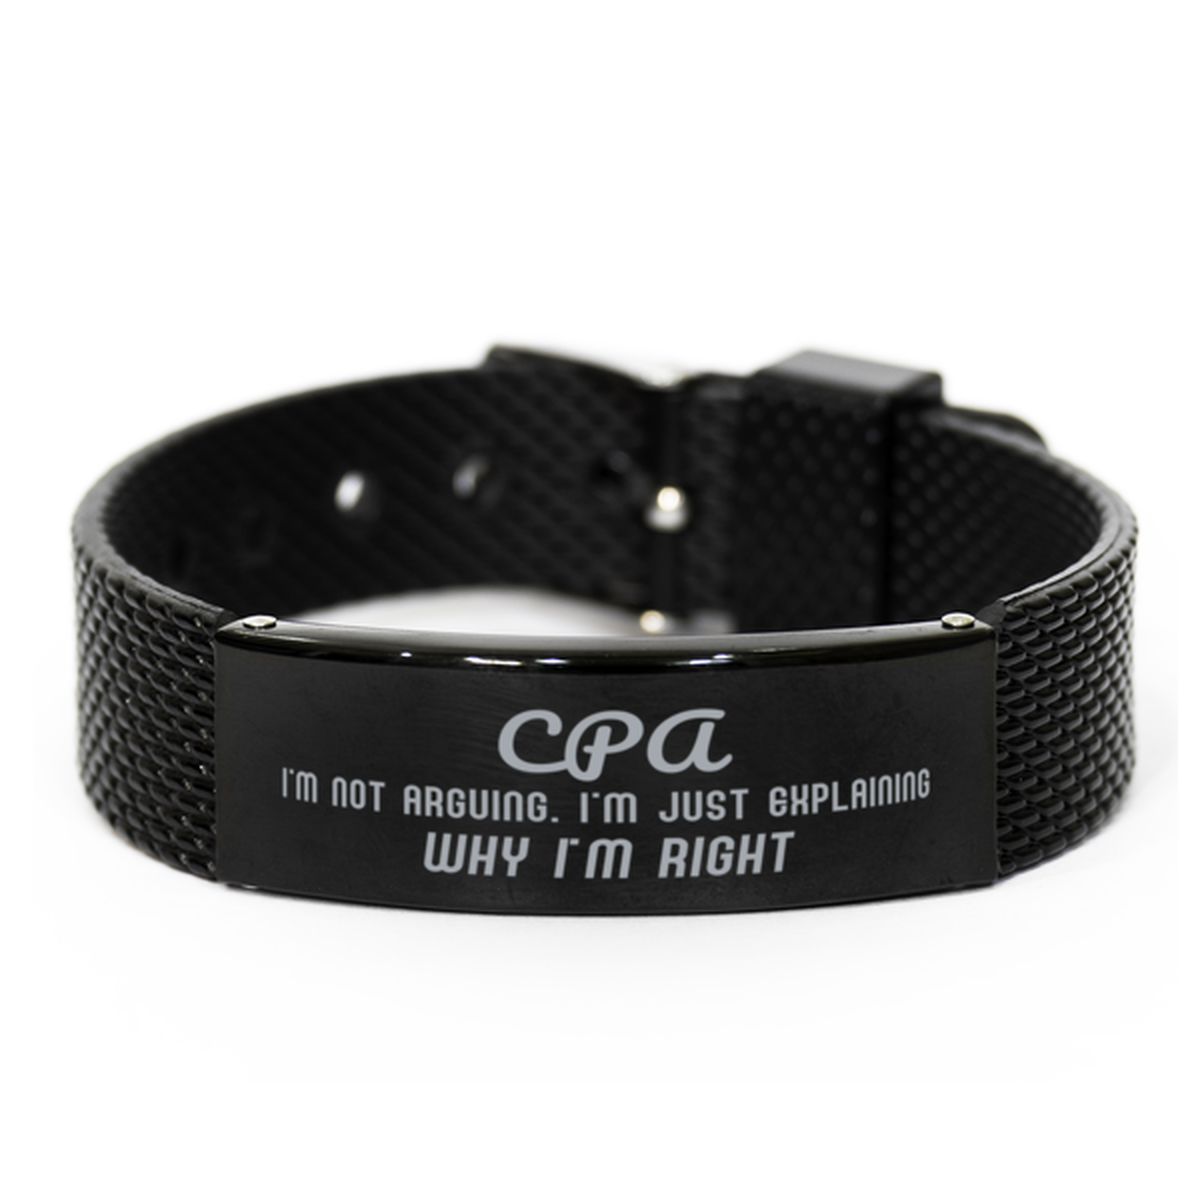 CPA I'm not Arguing. I'm Just Explaining Why I'm RIGHT Black Shark Mesh Bracelet, Funny Saying Quote CPA Gifts For CPA Graduation Birthday Christmas Gifts for Men Women Coworker